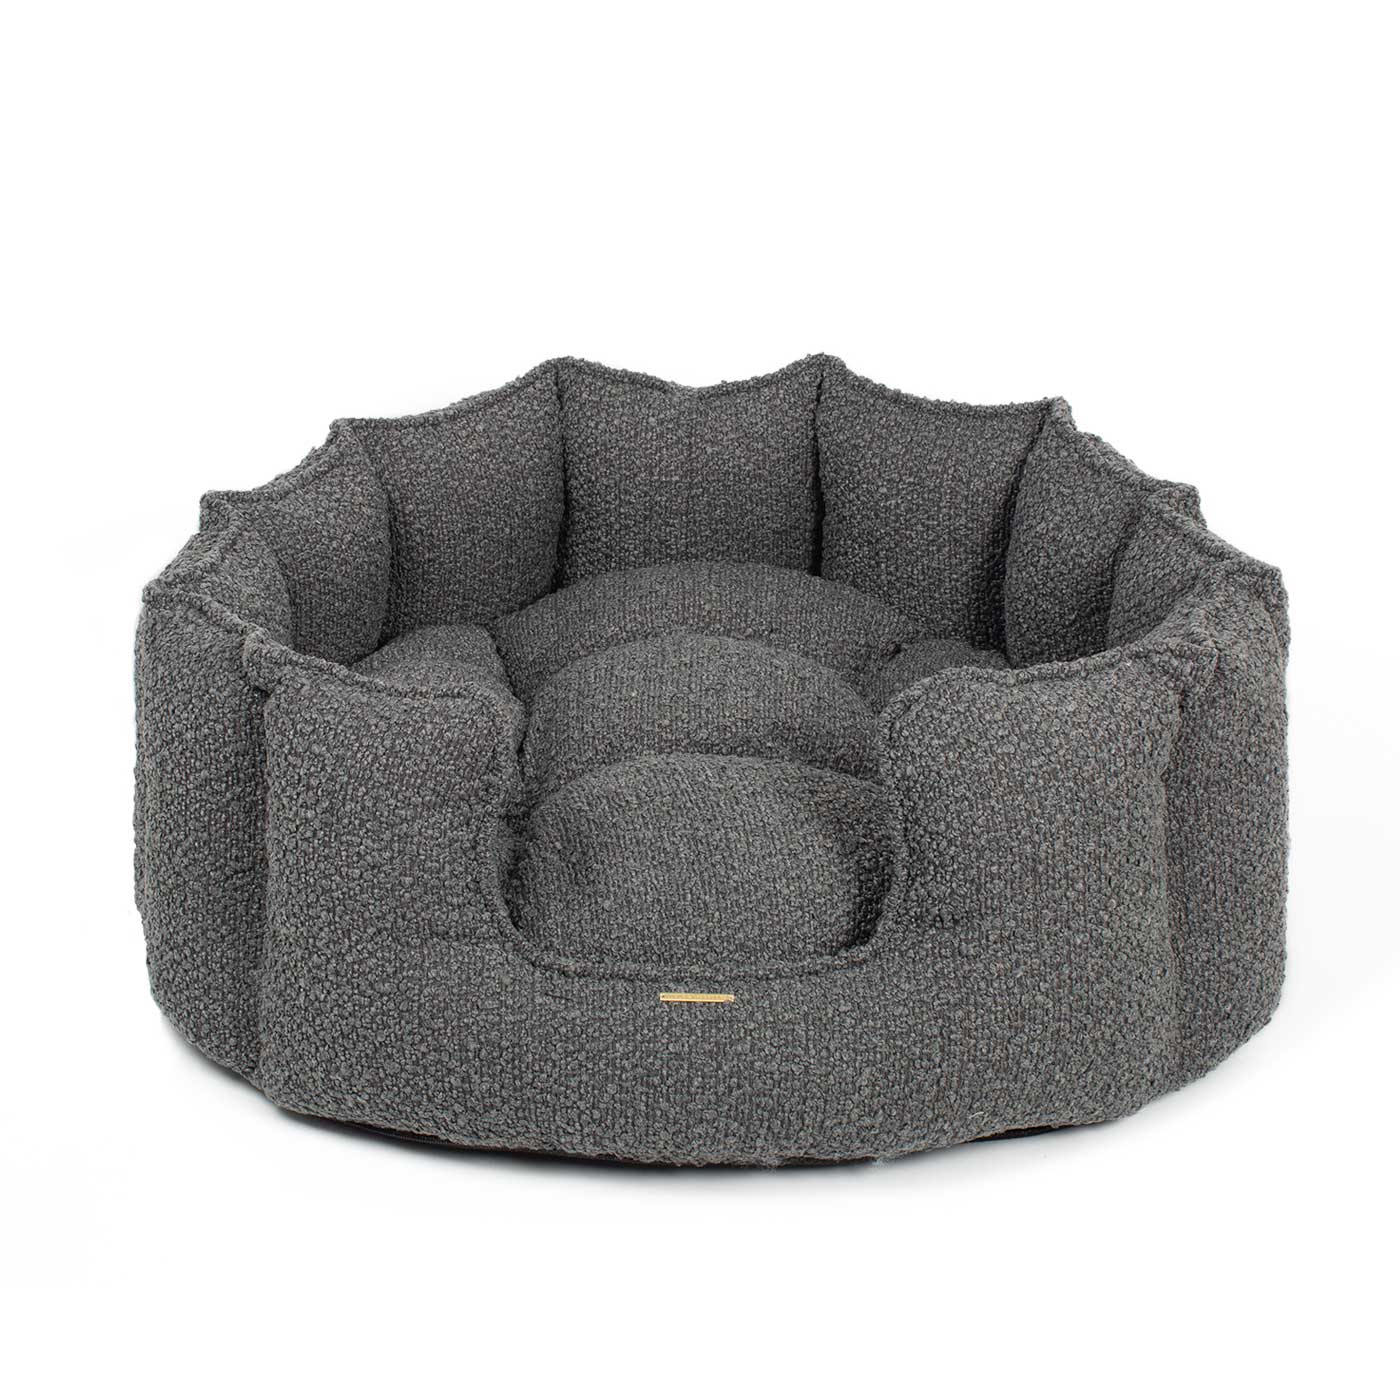 Discover Our Luxurious High Wall Bed For Cats & Kittens, Featuring inner pillow with plush teddy fleece on one side To Craft The Perfect Cat Bed In Stunning Granite Boucle! Available To Personalise Now at Lords & Labradors    